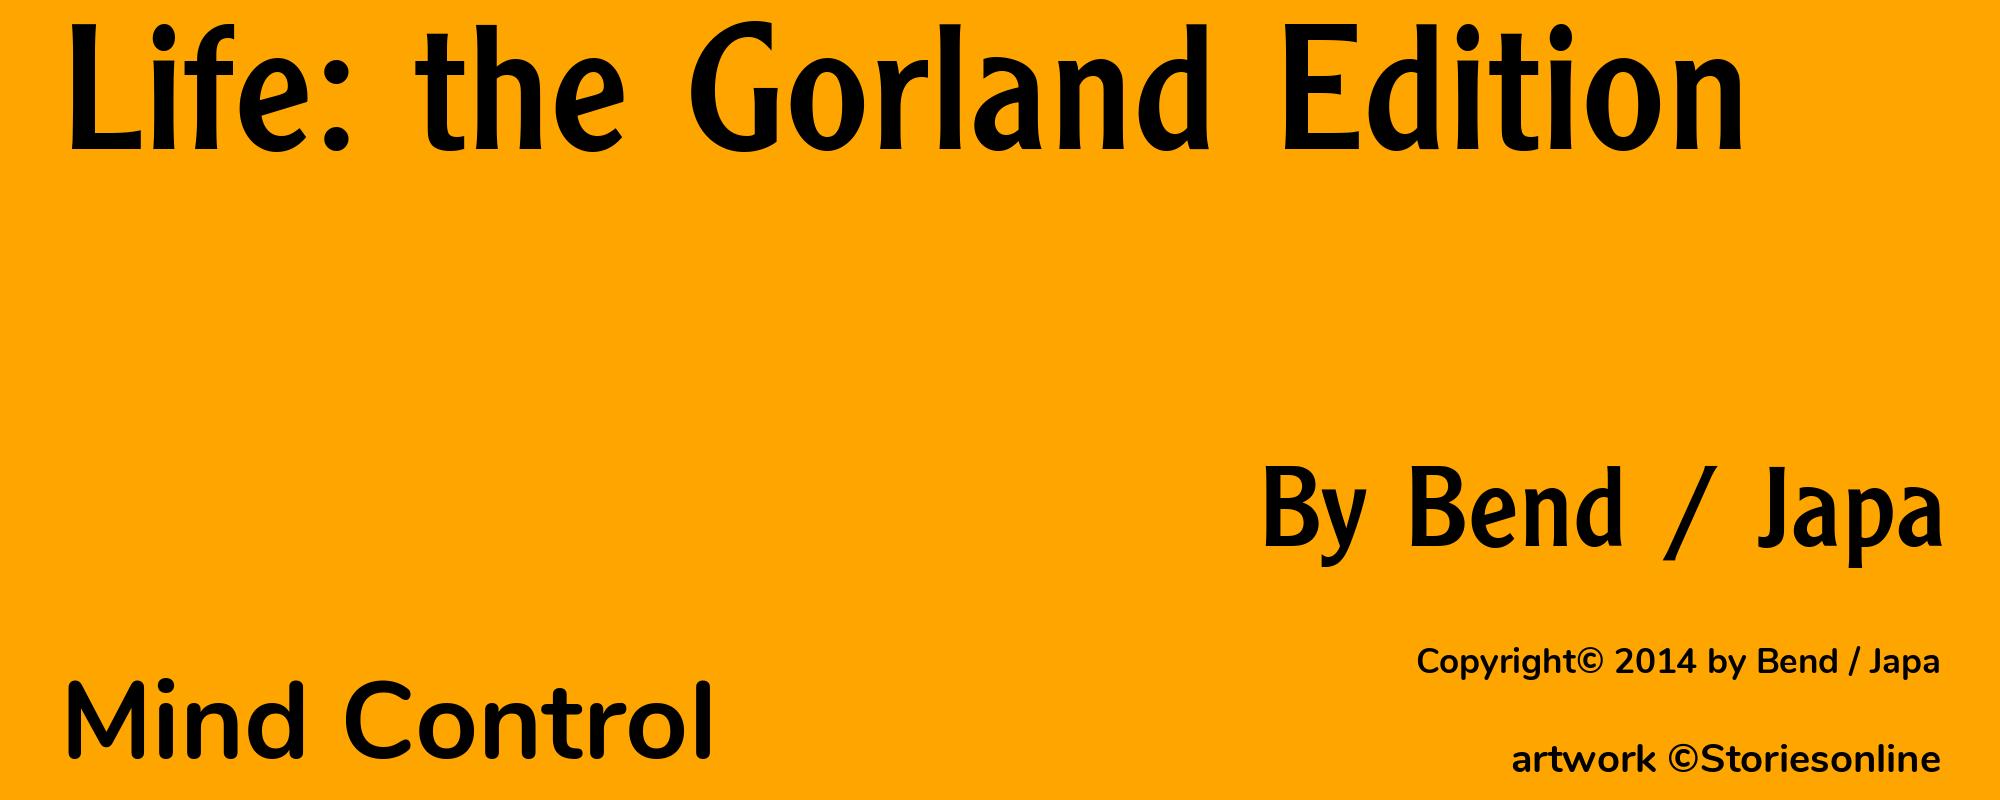 Life: the Gorland Edition - Cover